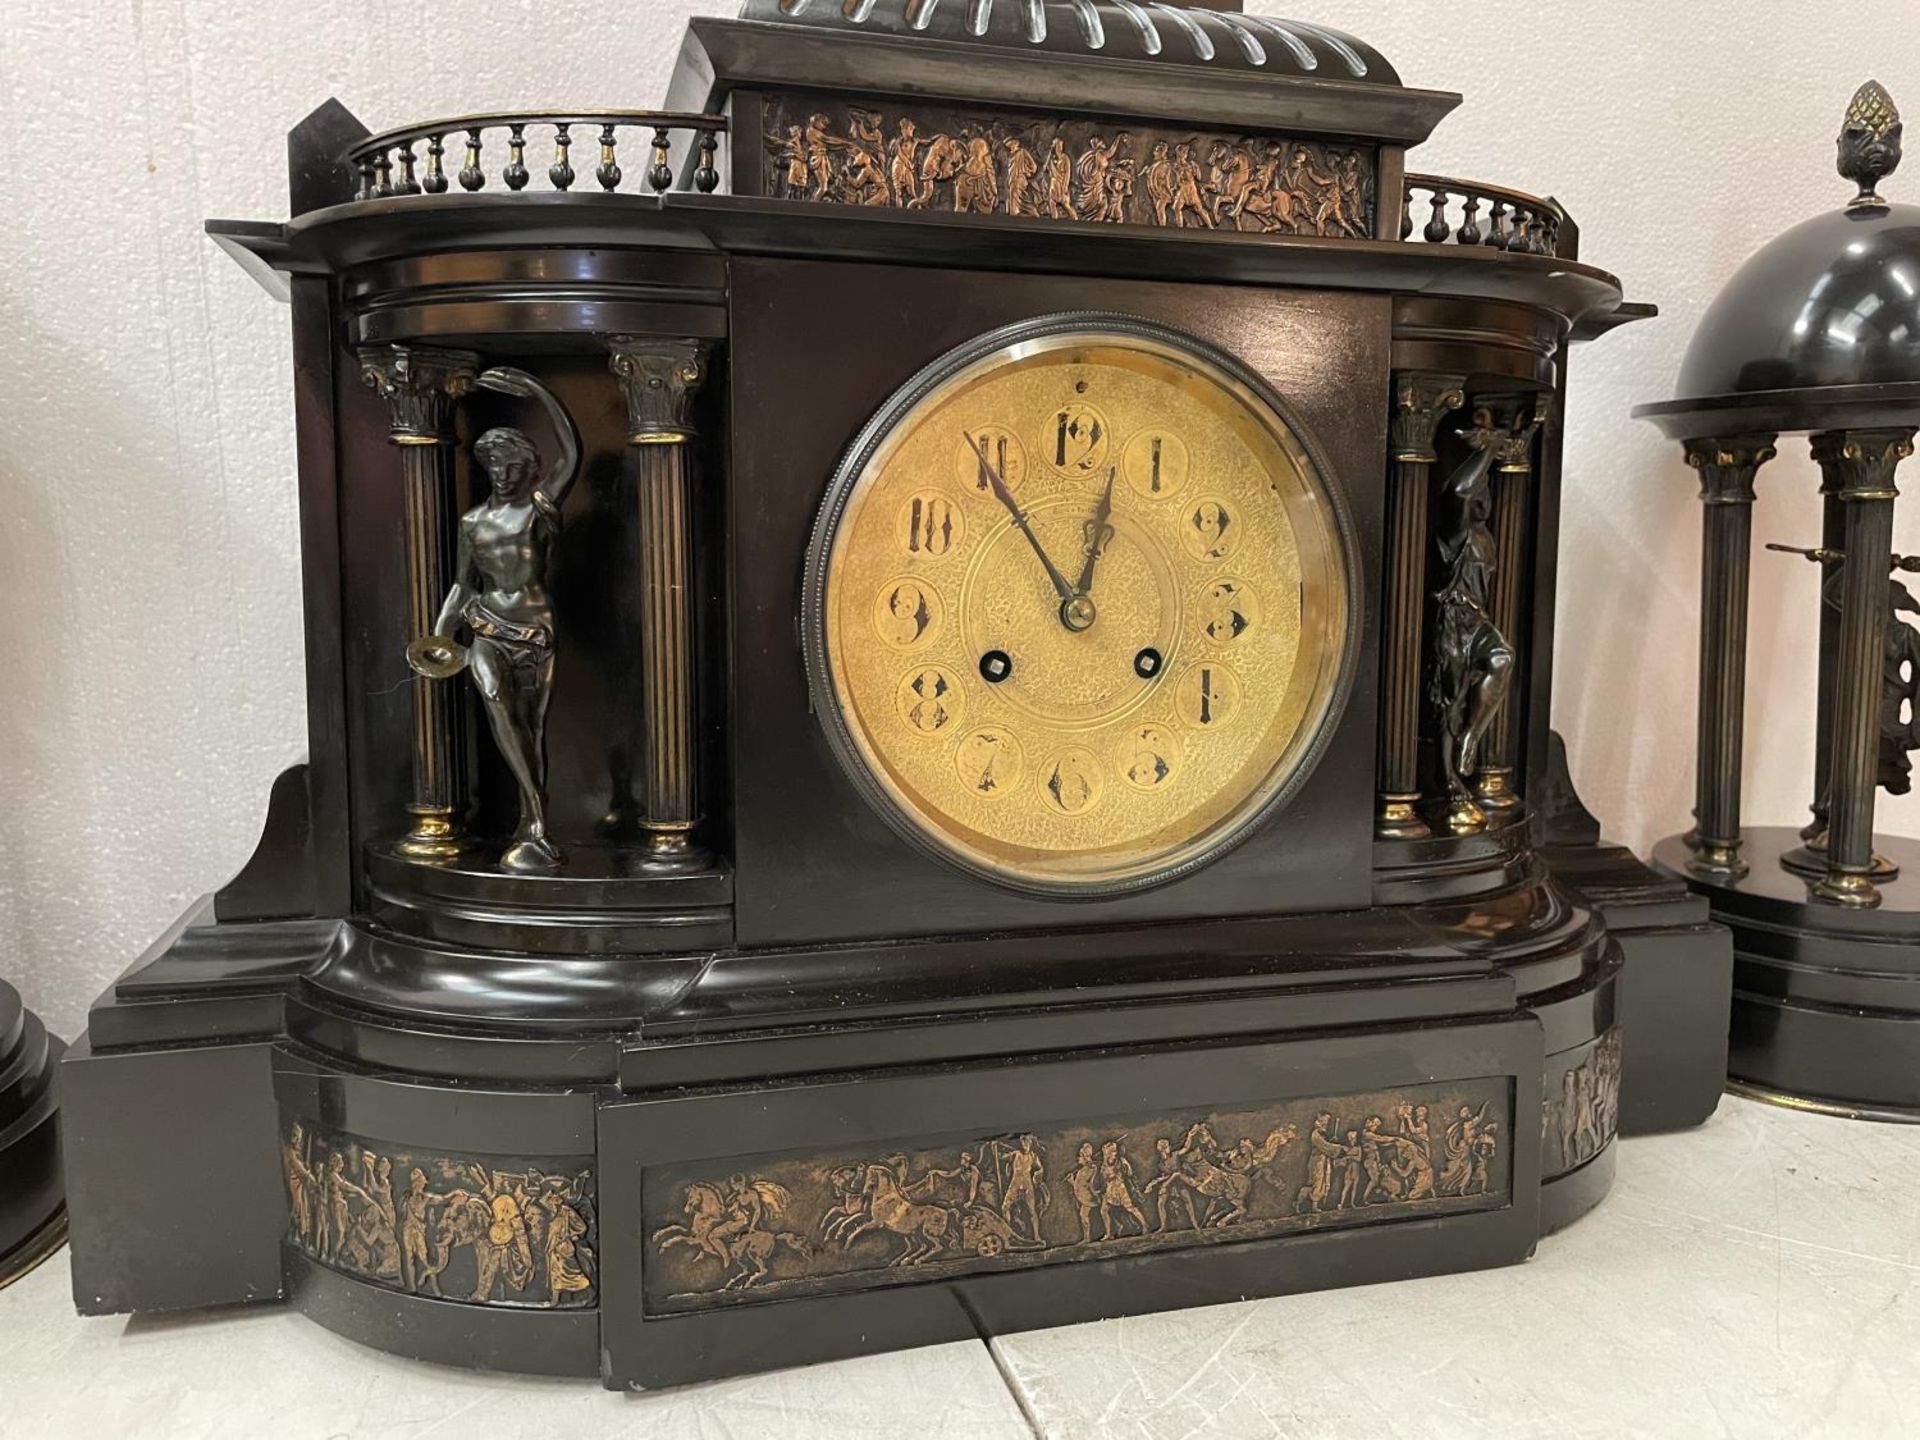 A LARGE DECORATIVE POLISHED SLATE OVER MANTEL CLOCK WITH EMBOSSED COPPER DEPICTING ROMAN SCENES 50CM - Image 7 of 7